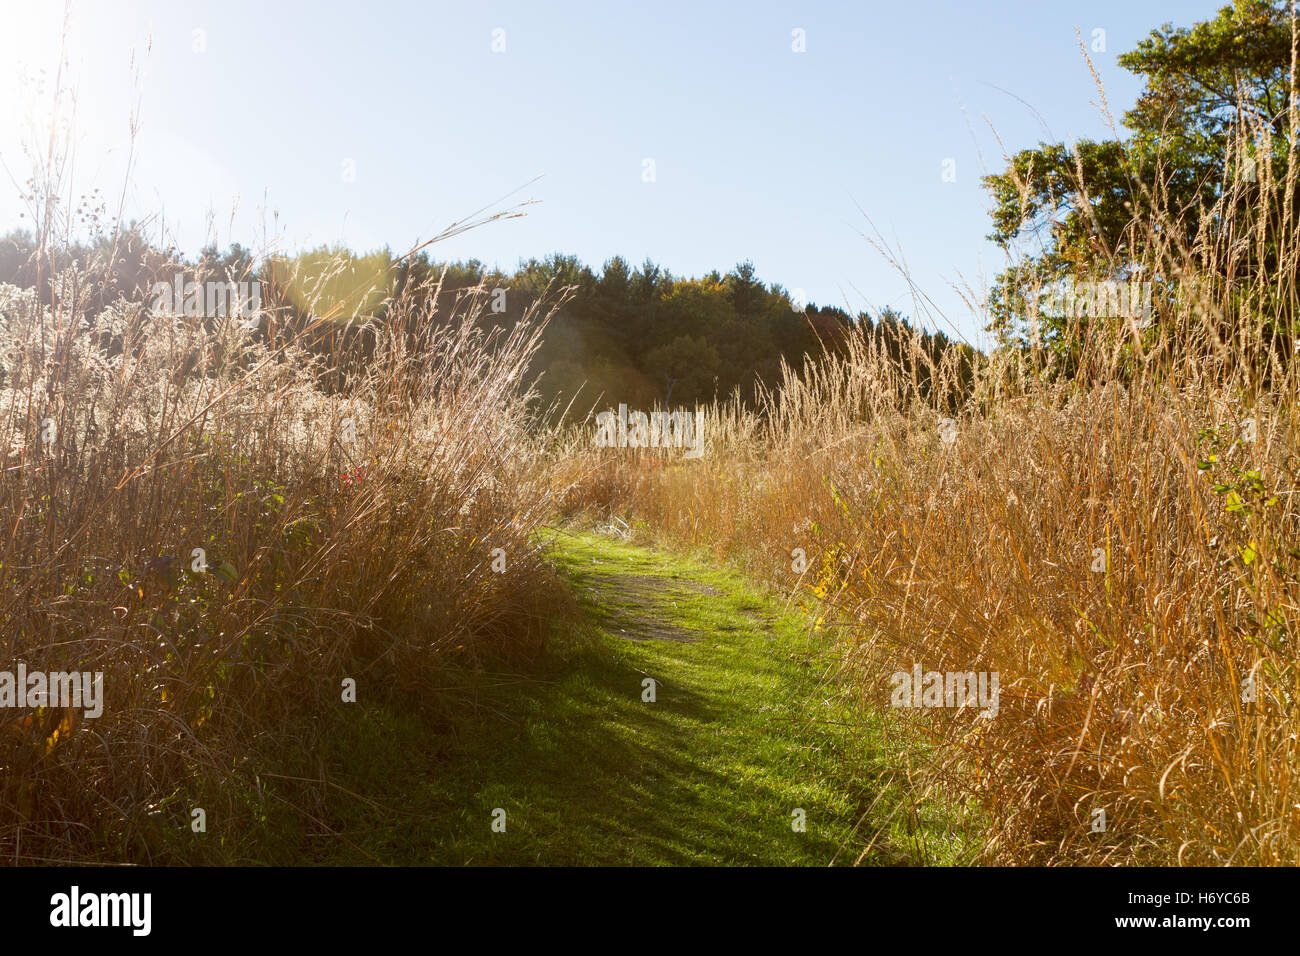 Trail through prairie with forest in background Stock Photo